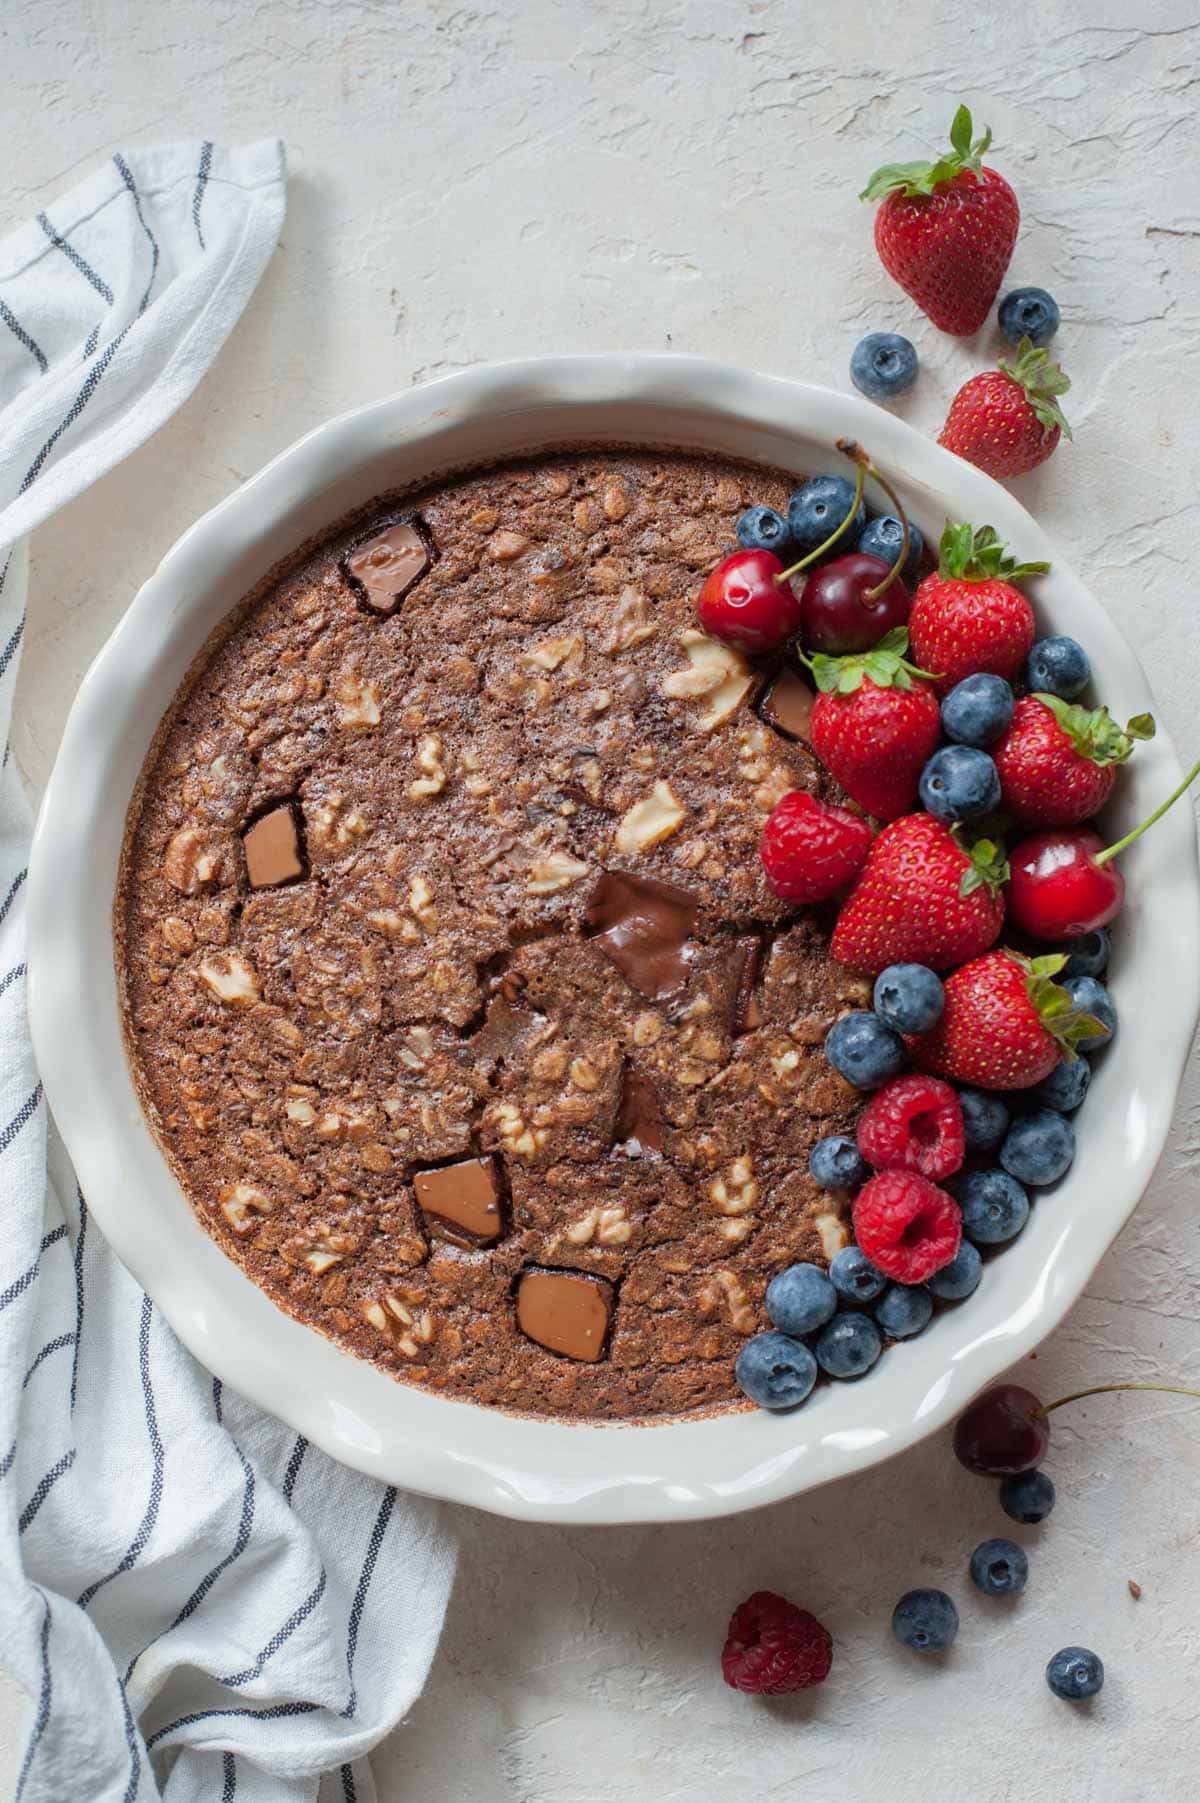 Chocolate oatmeal in a white baking dish topped with fresh berries.